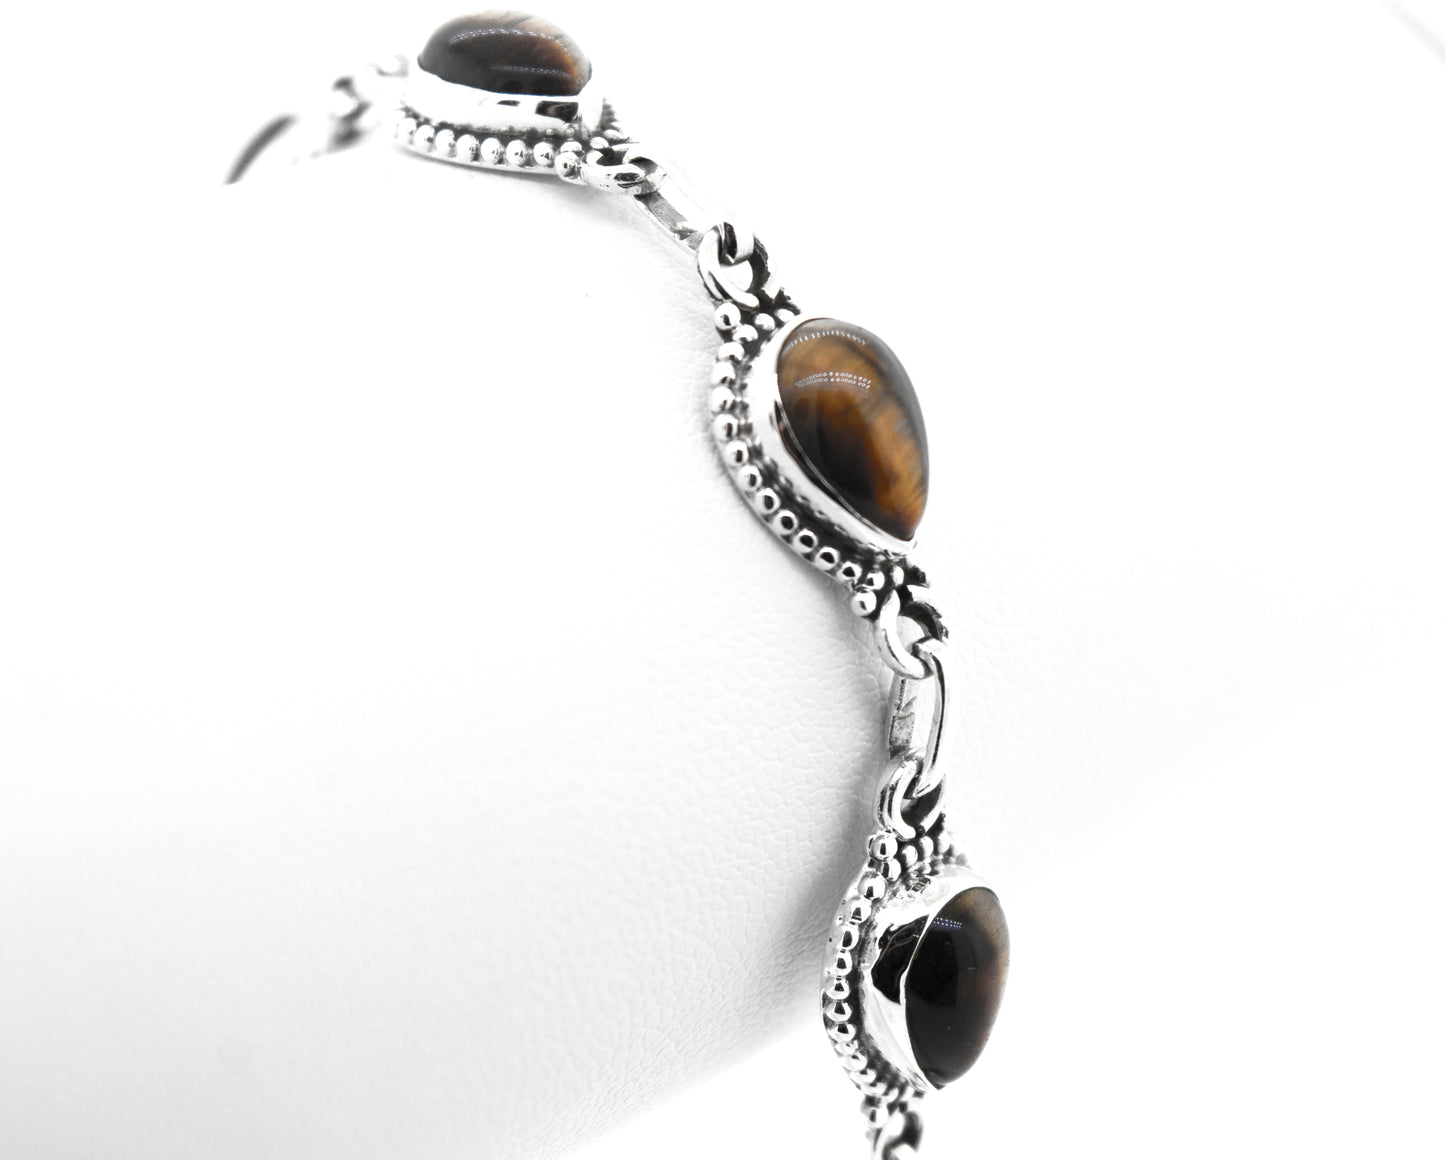 A vibrant Teardrop Shape Tiger's Eye Bracelet With Ball Border from Super Silver.